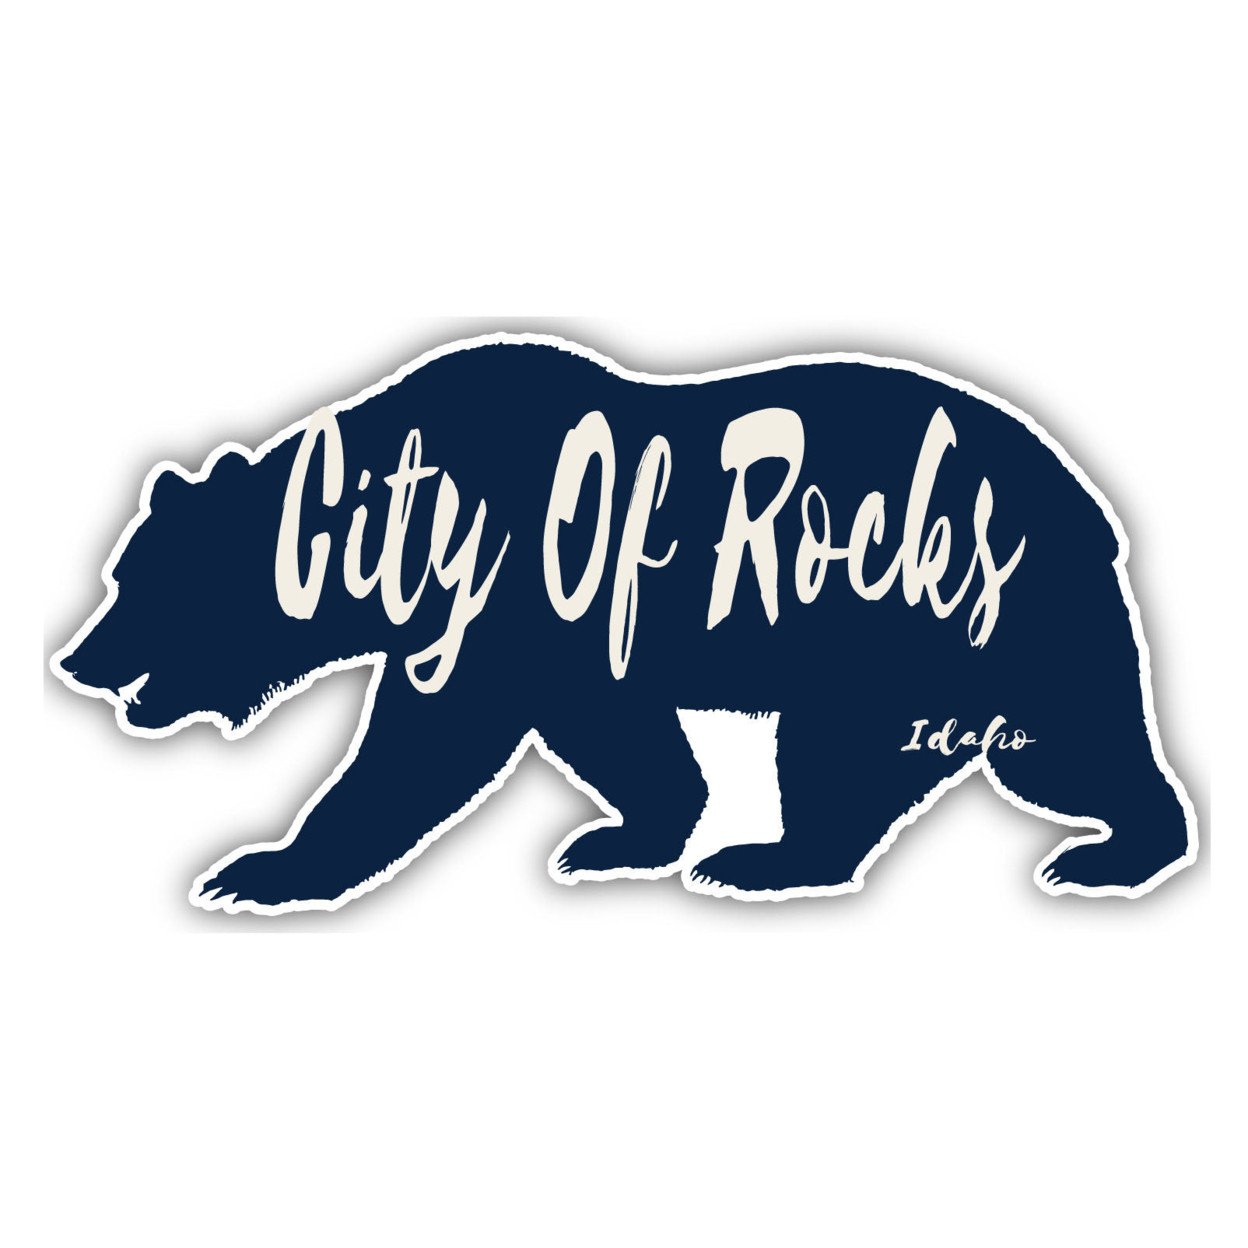 City Of Rocks Idaho Souvenir Decorative Stickers (Choose Theme And Size) - 4-Pack, 8-Inch, Camp Life